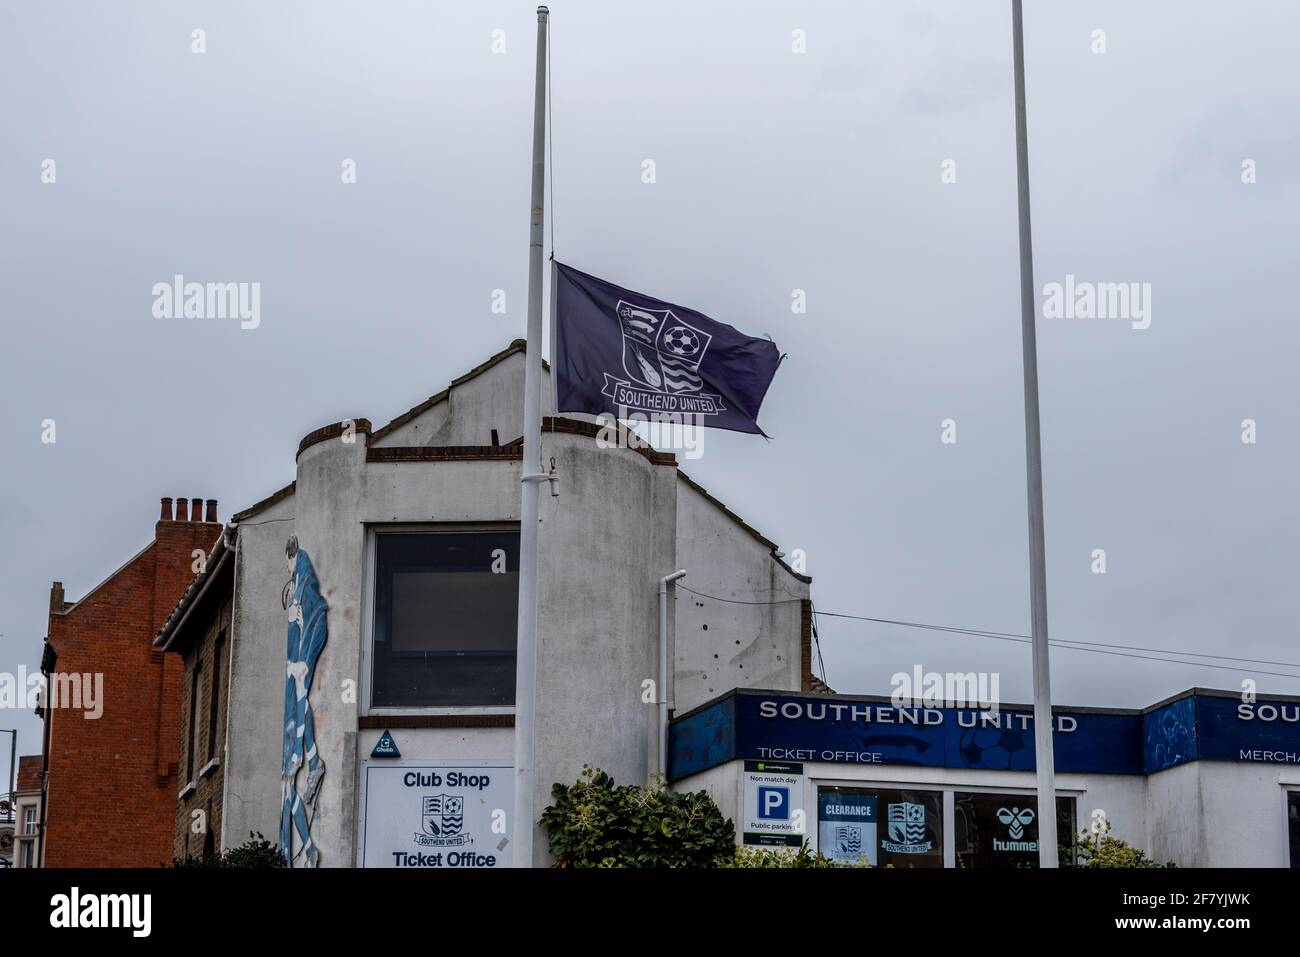 Southend United Football Club flag flying at half mast following death of Prince Philip, Duke of Edinburgh outside Roots Hall football ground entrance Stock Photo